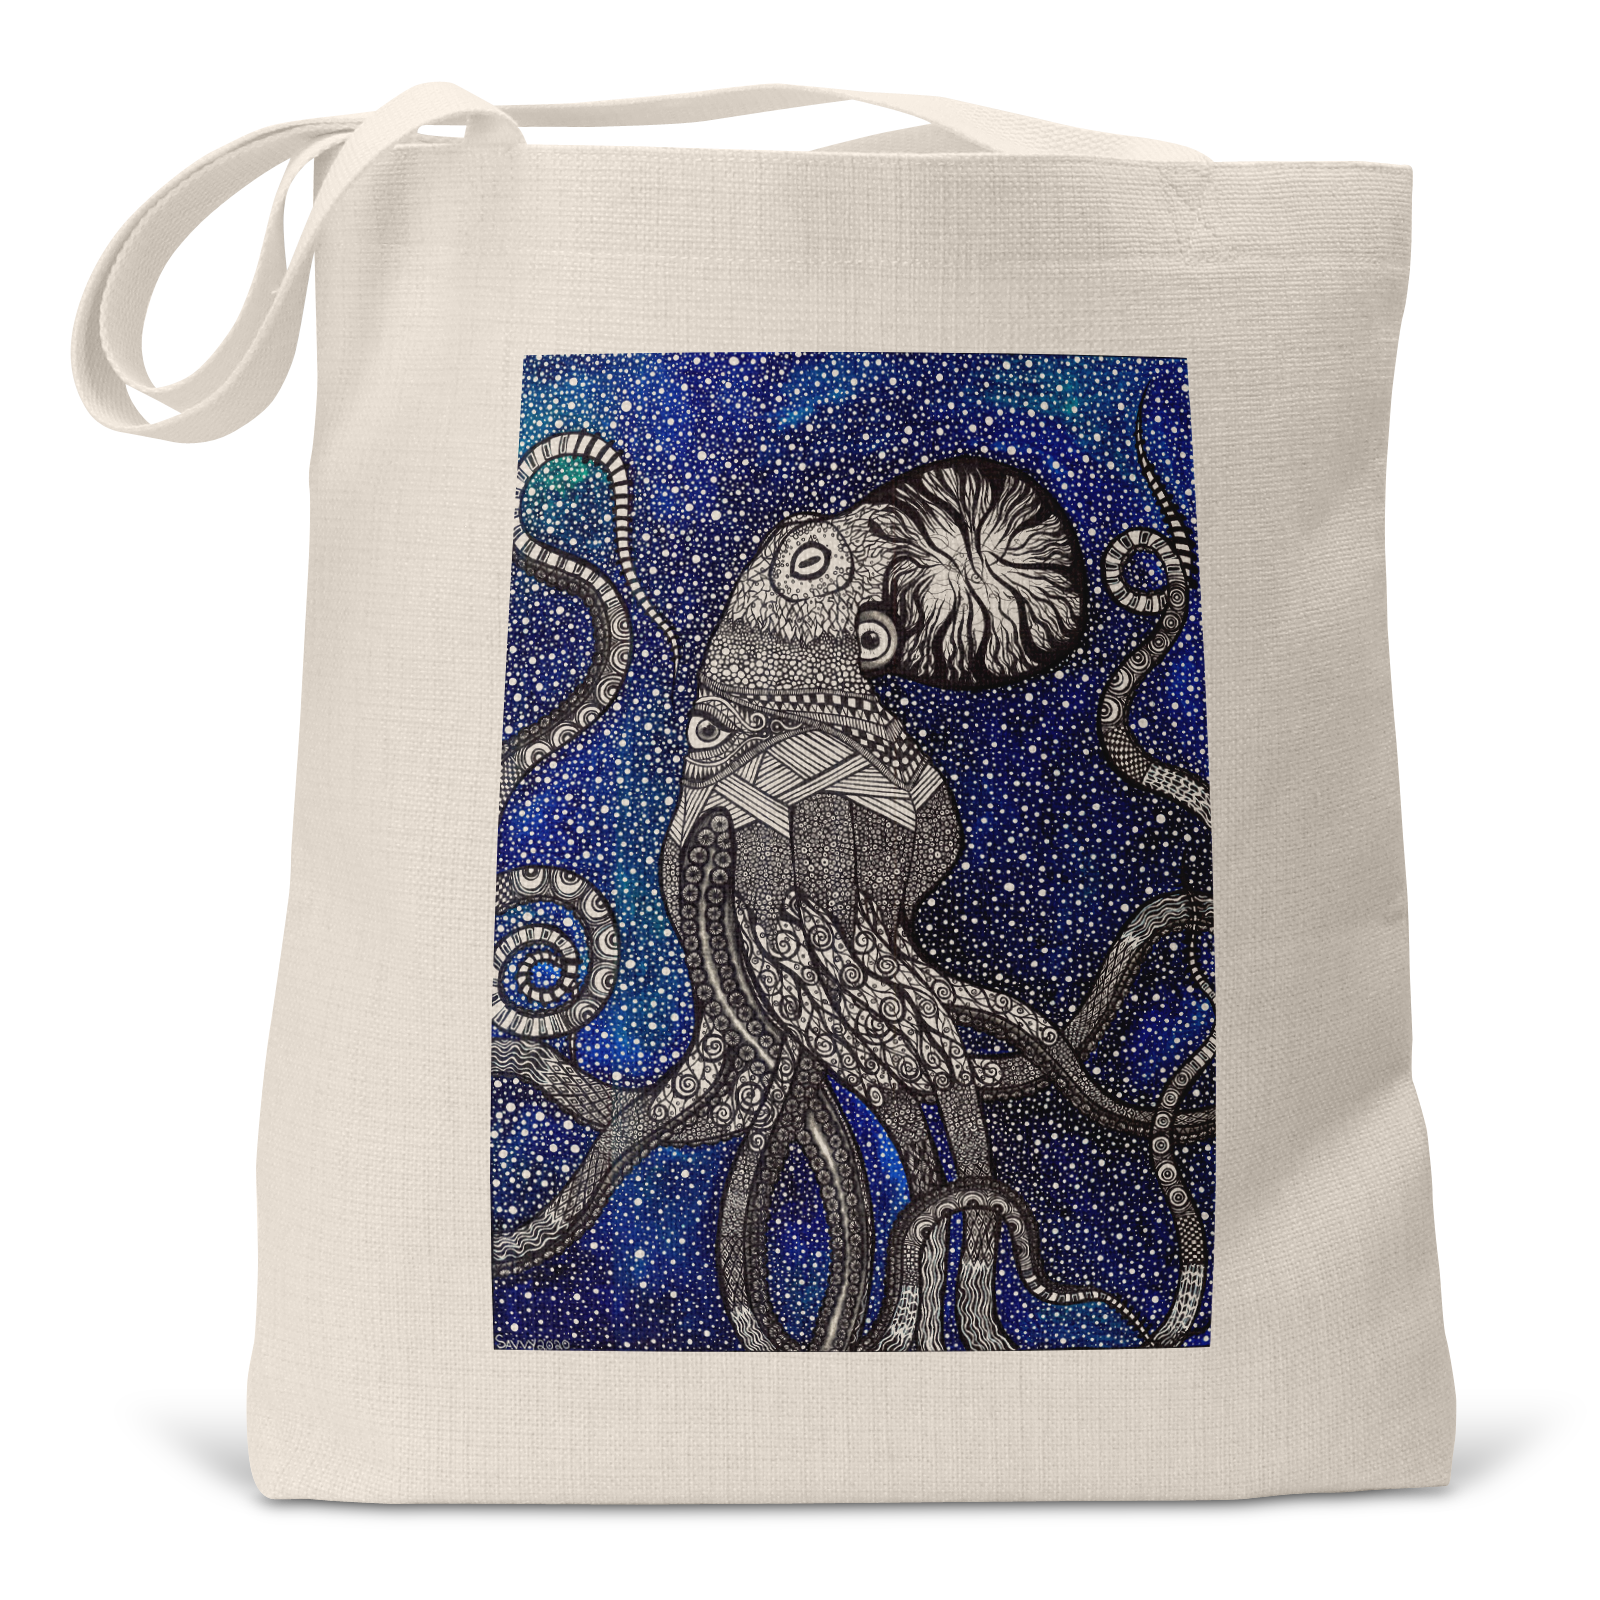 "Ocular Octopus" - Small/Large Linen Tote